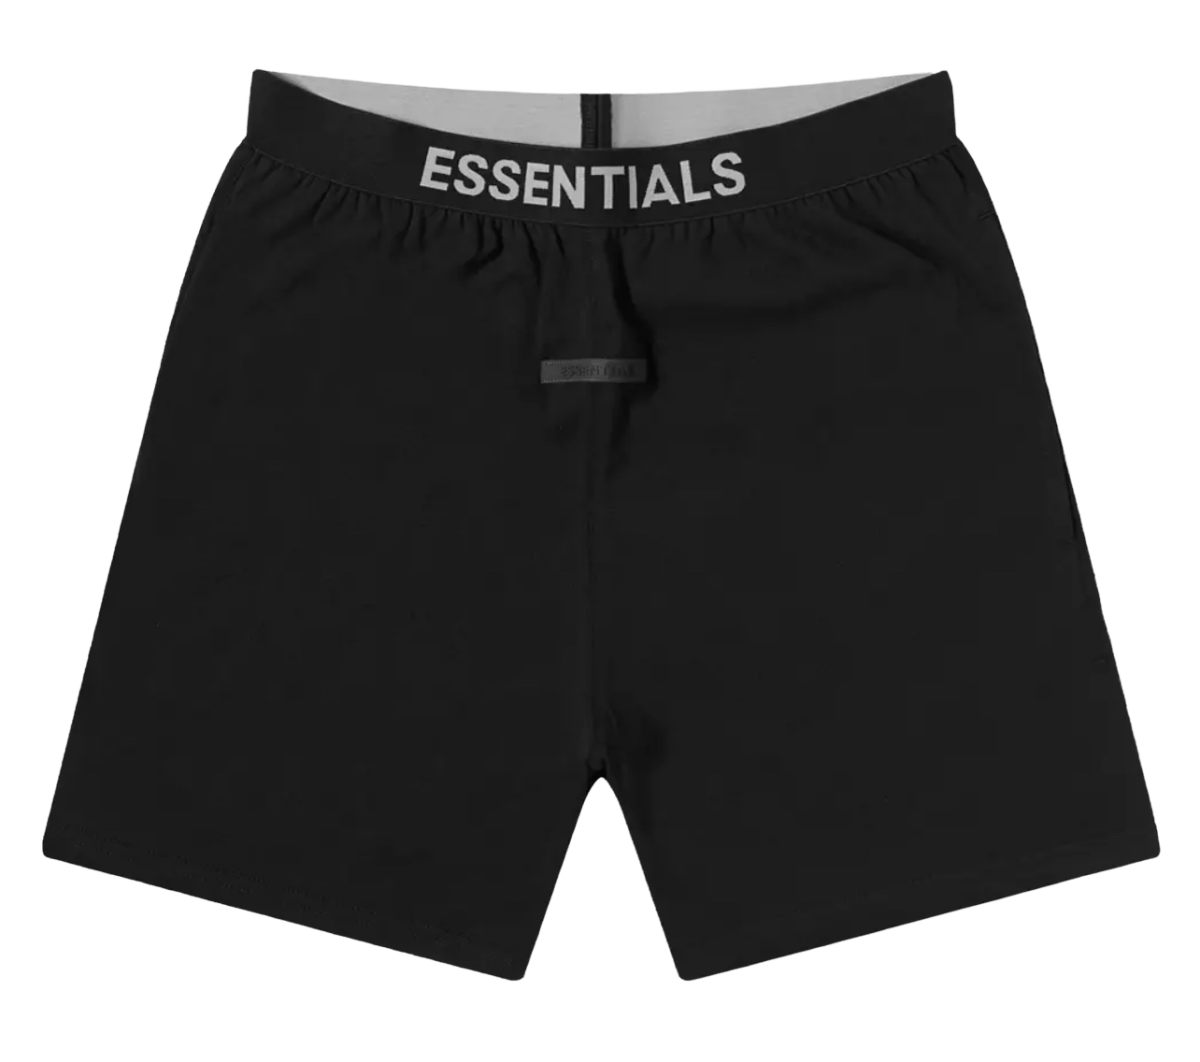 Essentials Fear of God Lounge Shorts Black - Jawns on Fire Sneakers